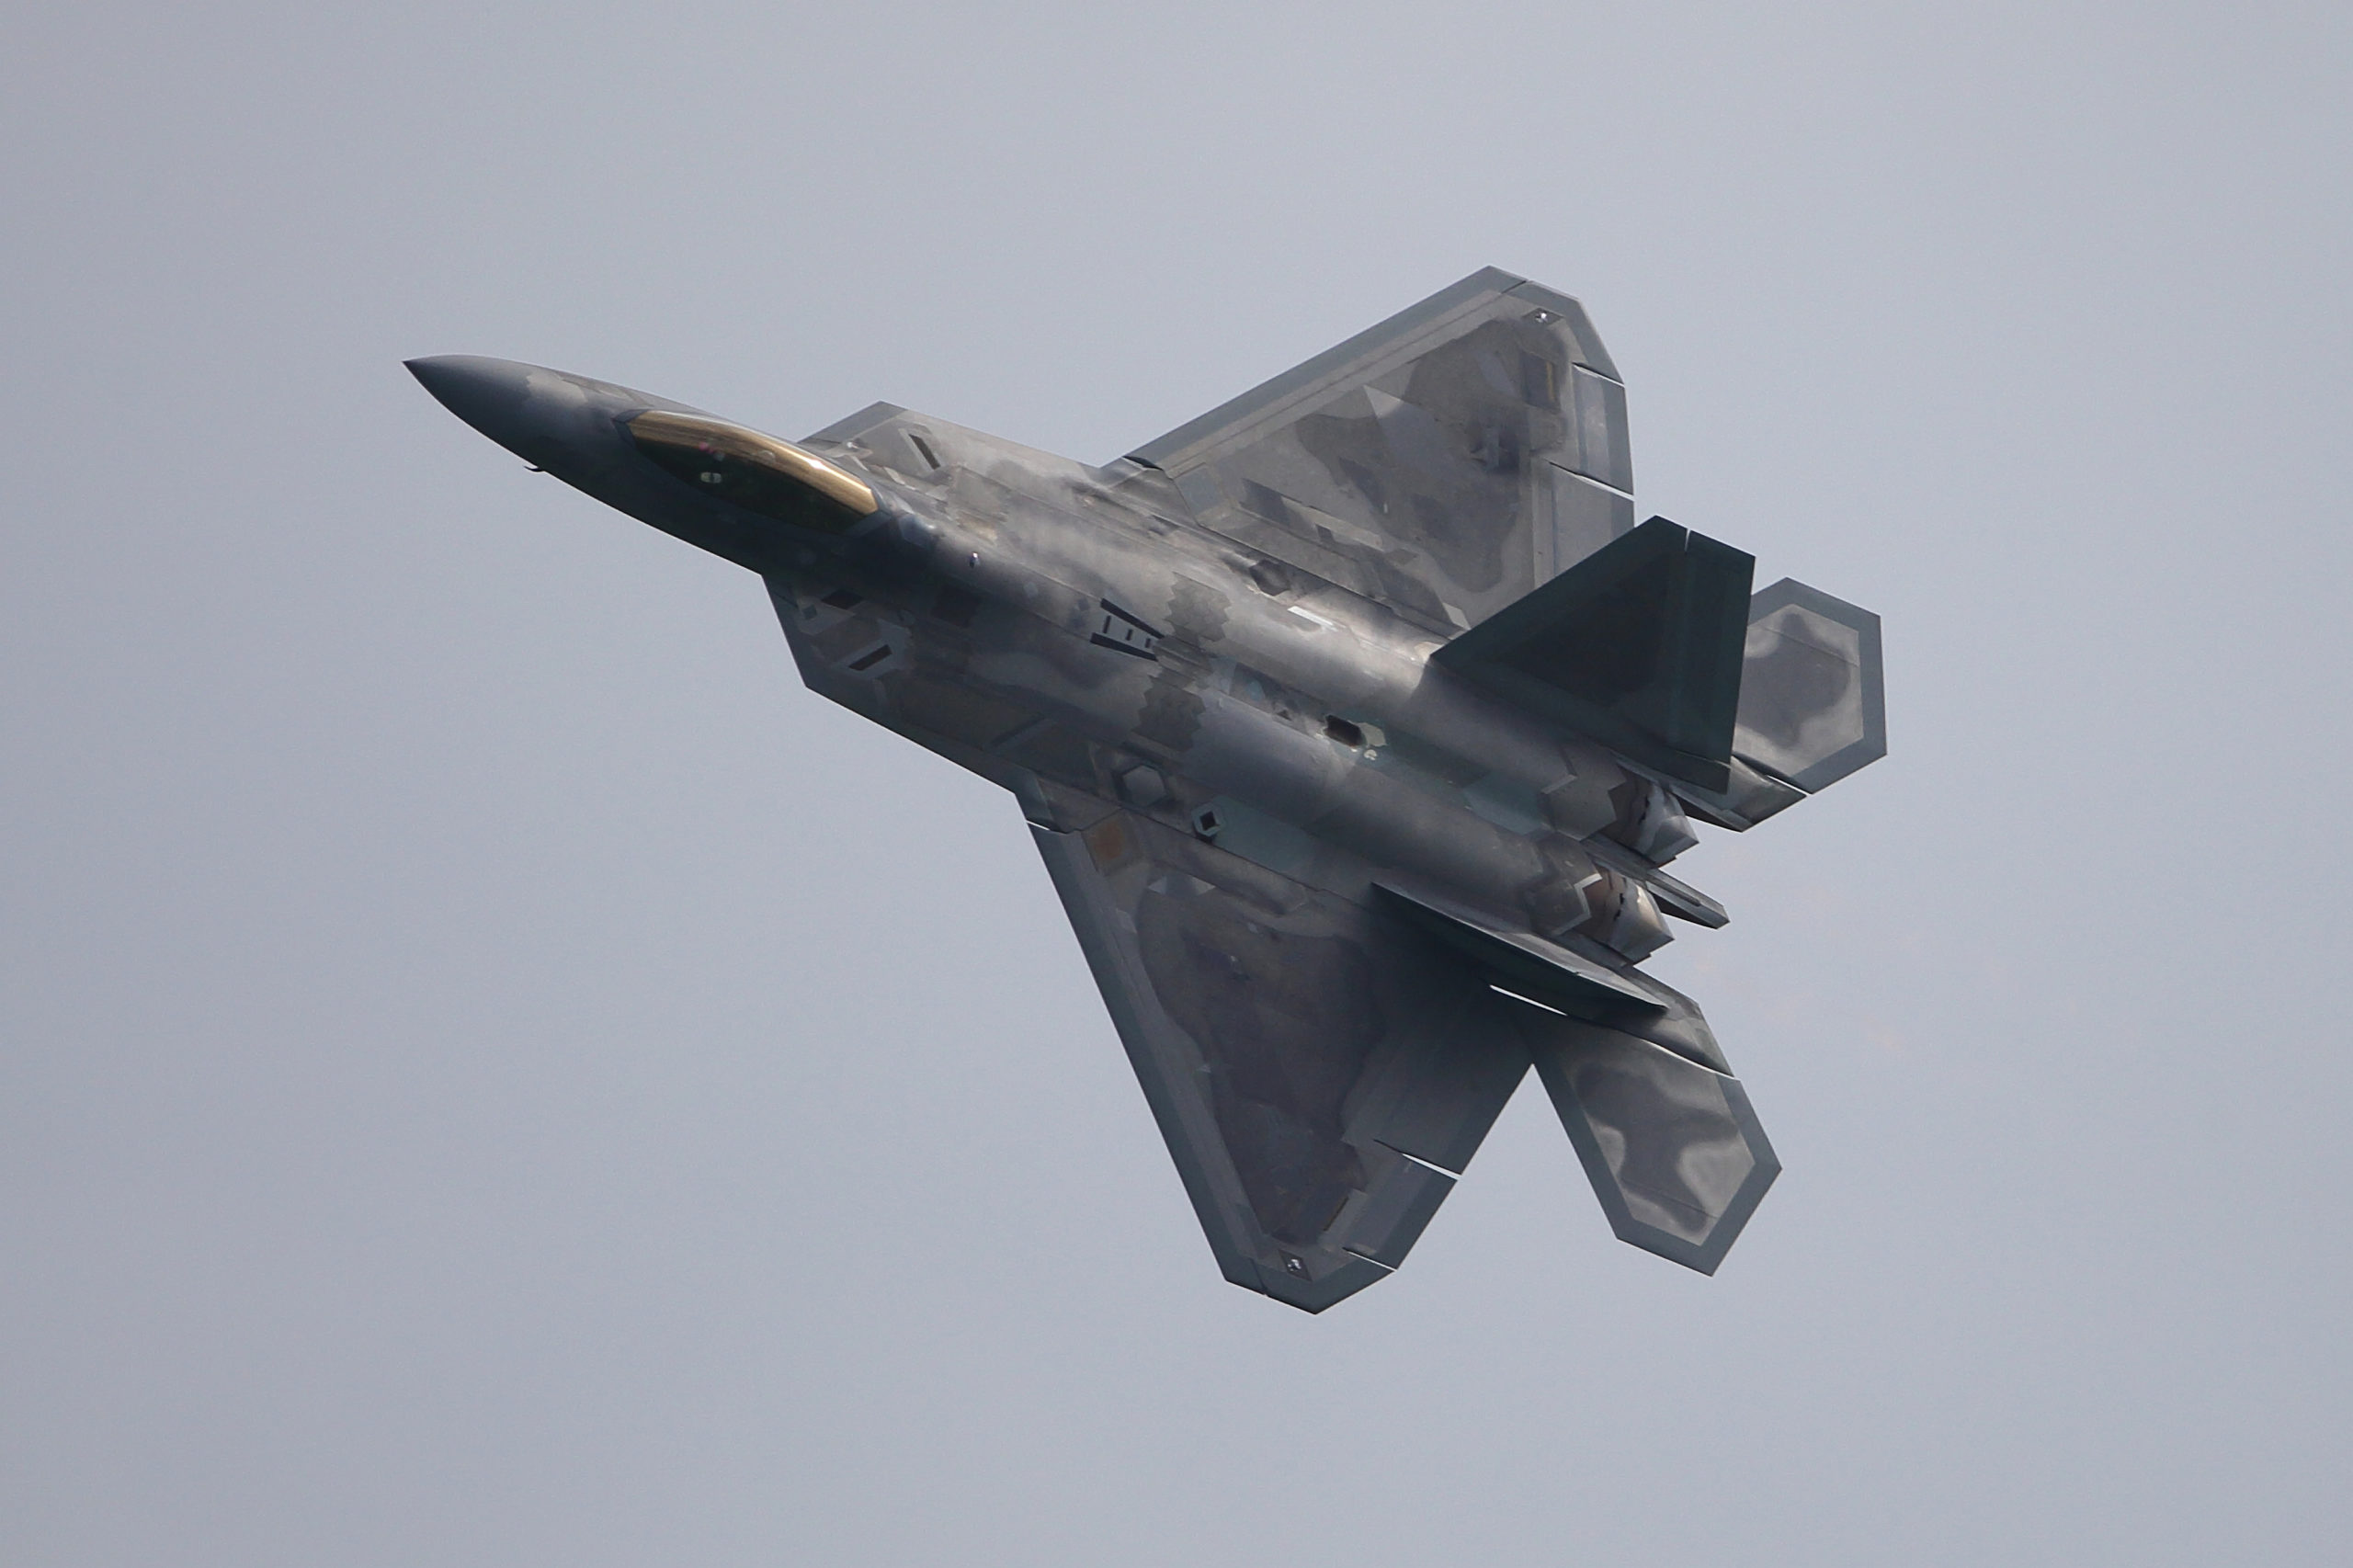 SINGAPORE - FEBRUARY 09:  A United States Air Force F-22 Raptor fighter jet performs an aerial display during the Singapore Airshow media preview on February 9, 2020 in Singapore.  (Photo by Suhaimi Abdullah/Getty Images)